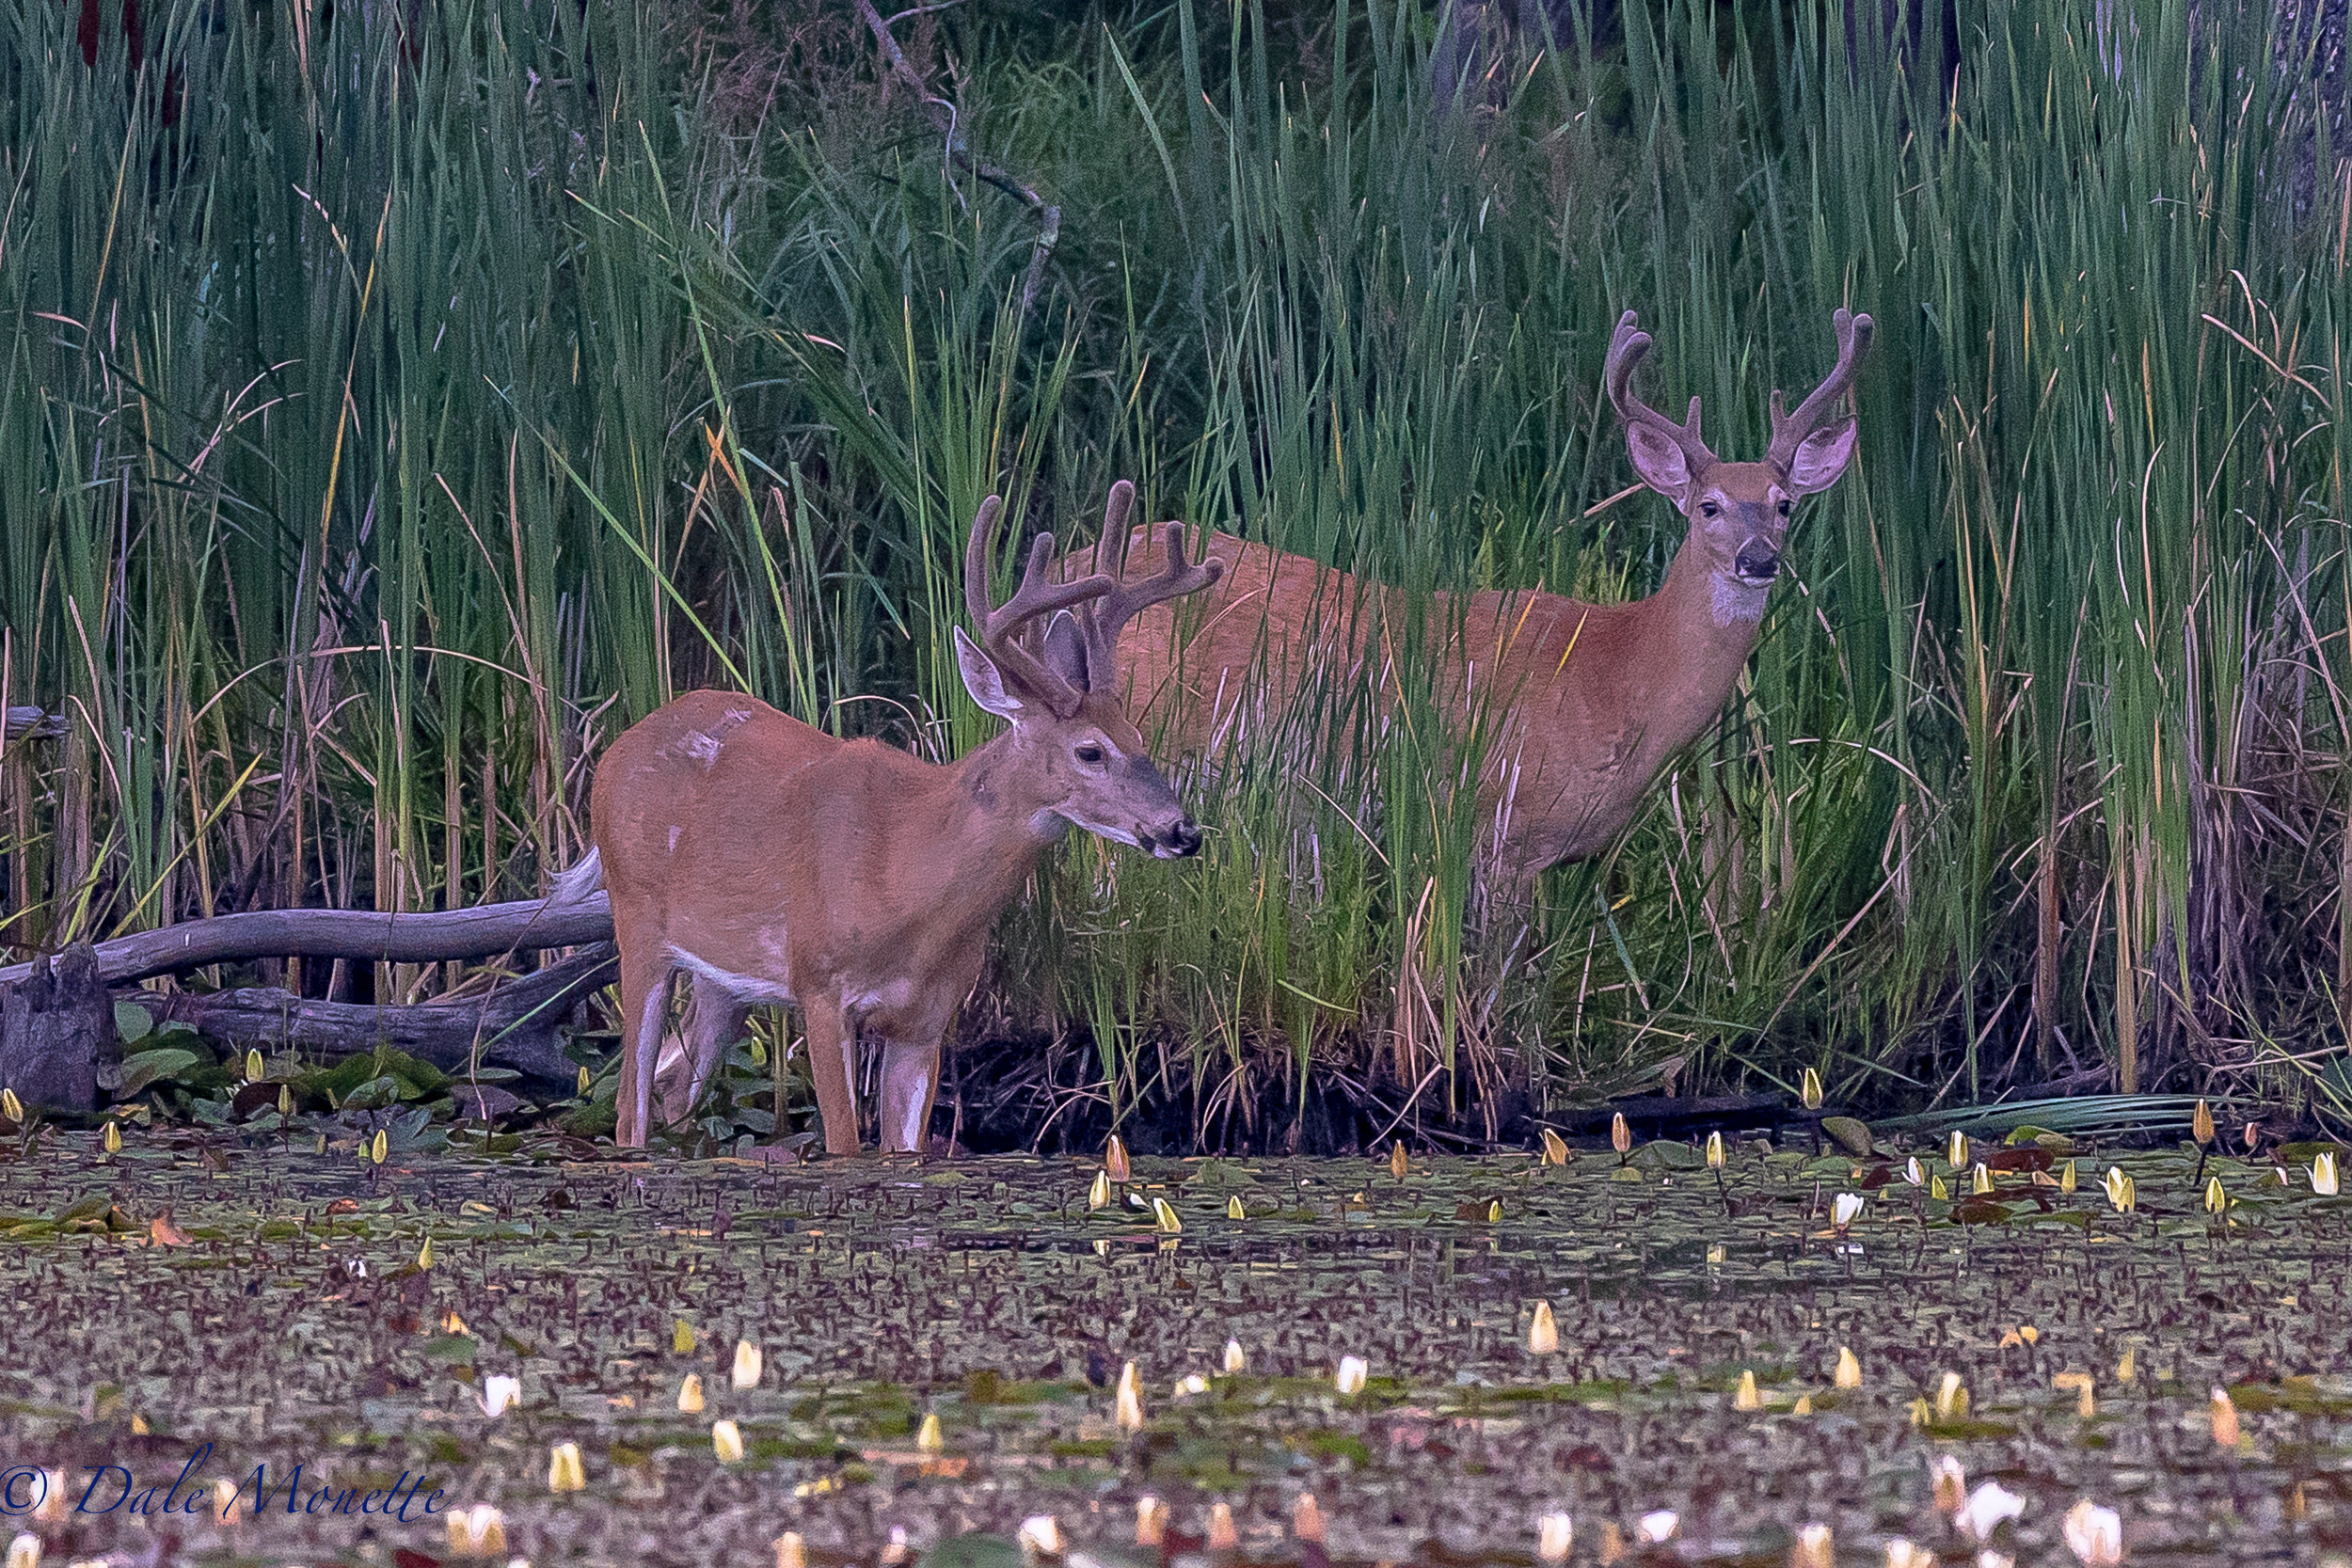   These same two bucks came back out for fresh greens for breakfast early this morning. &nbsp;This is the second day this week I have seen them. &nbsp;A few days ago they had a third one with them &nbsp;7/20/17  